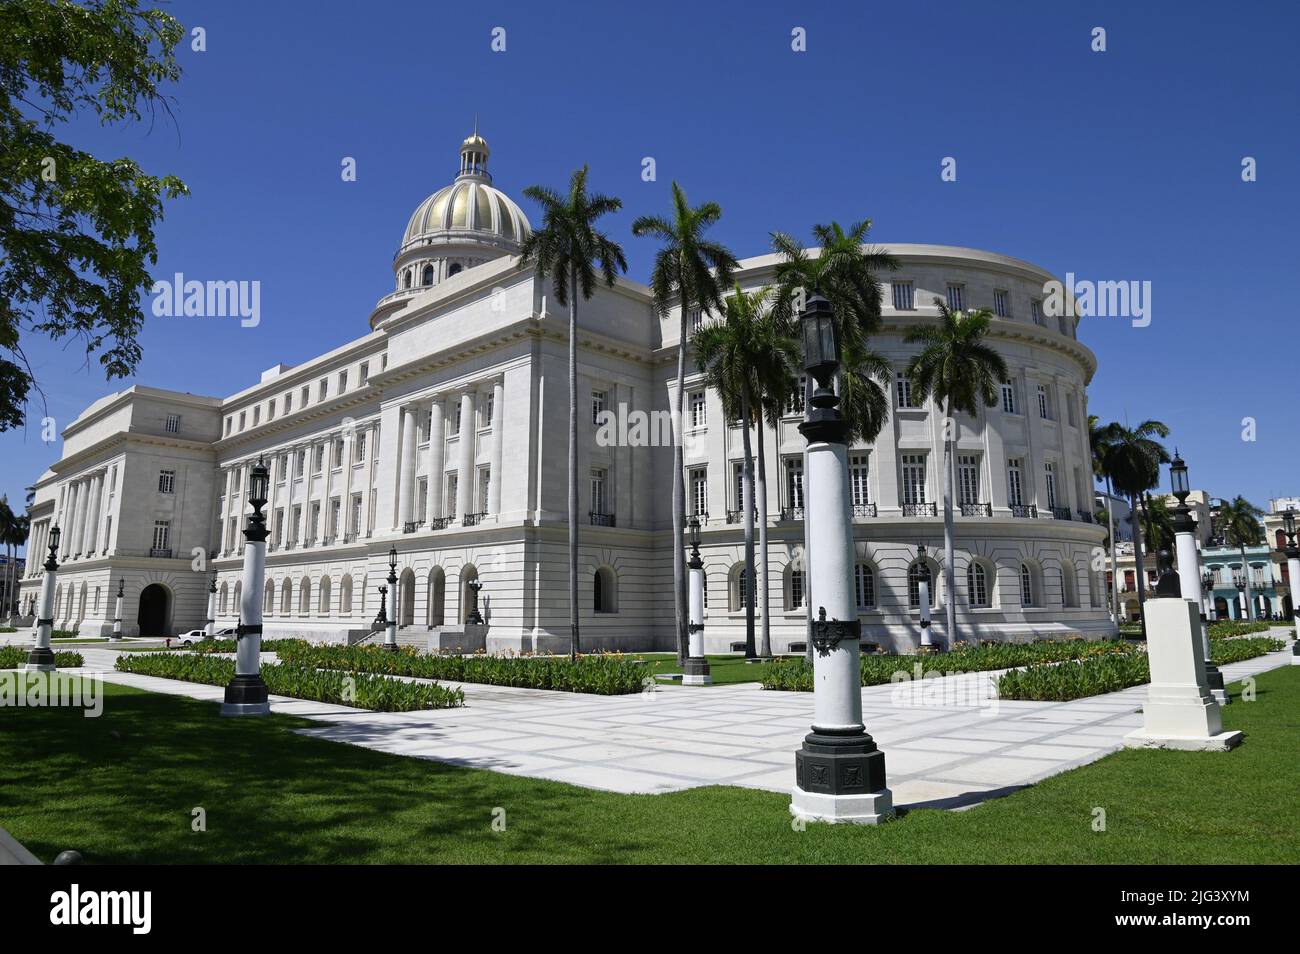 Landscape with panoramic view of El Capitolio, the emblematic National Capitol building in the historic center of Havana, Cuba. Stock Photo